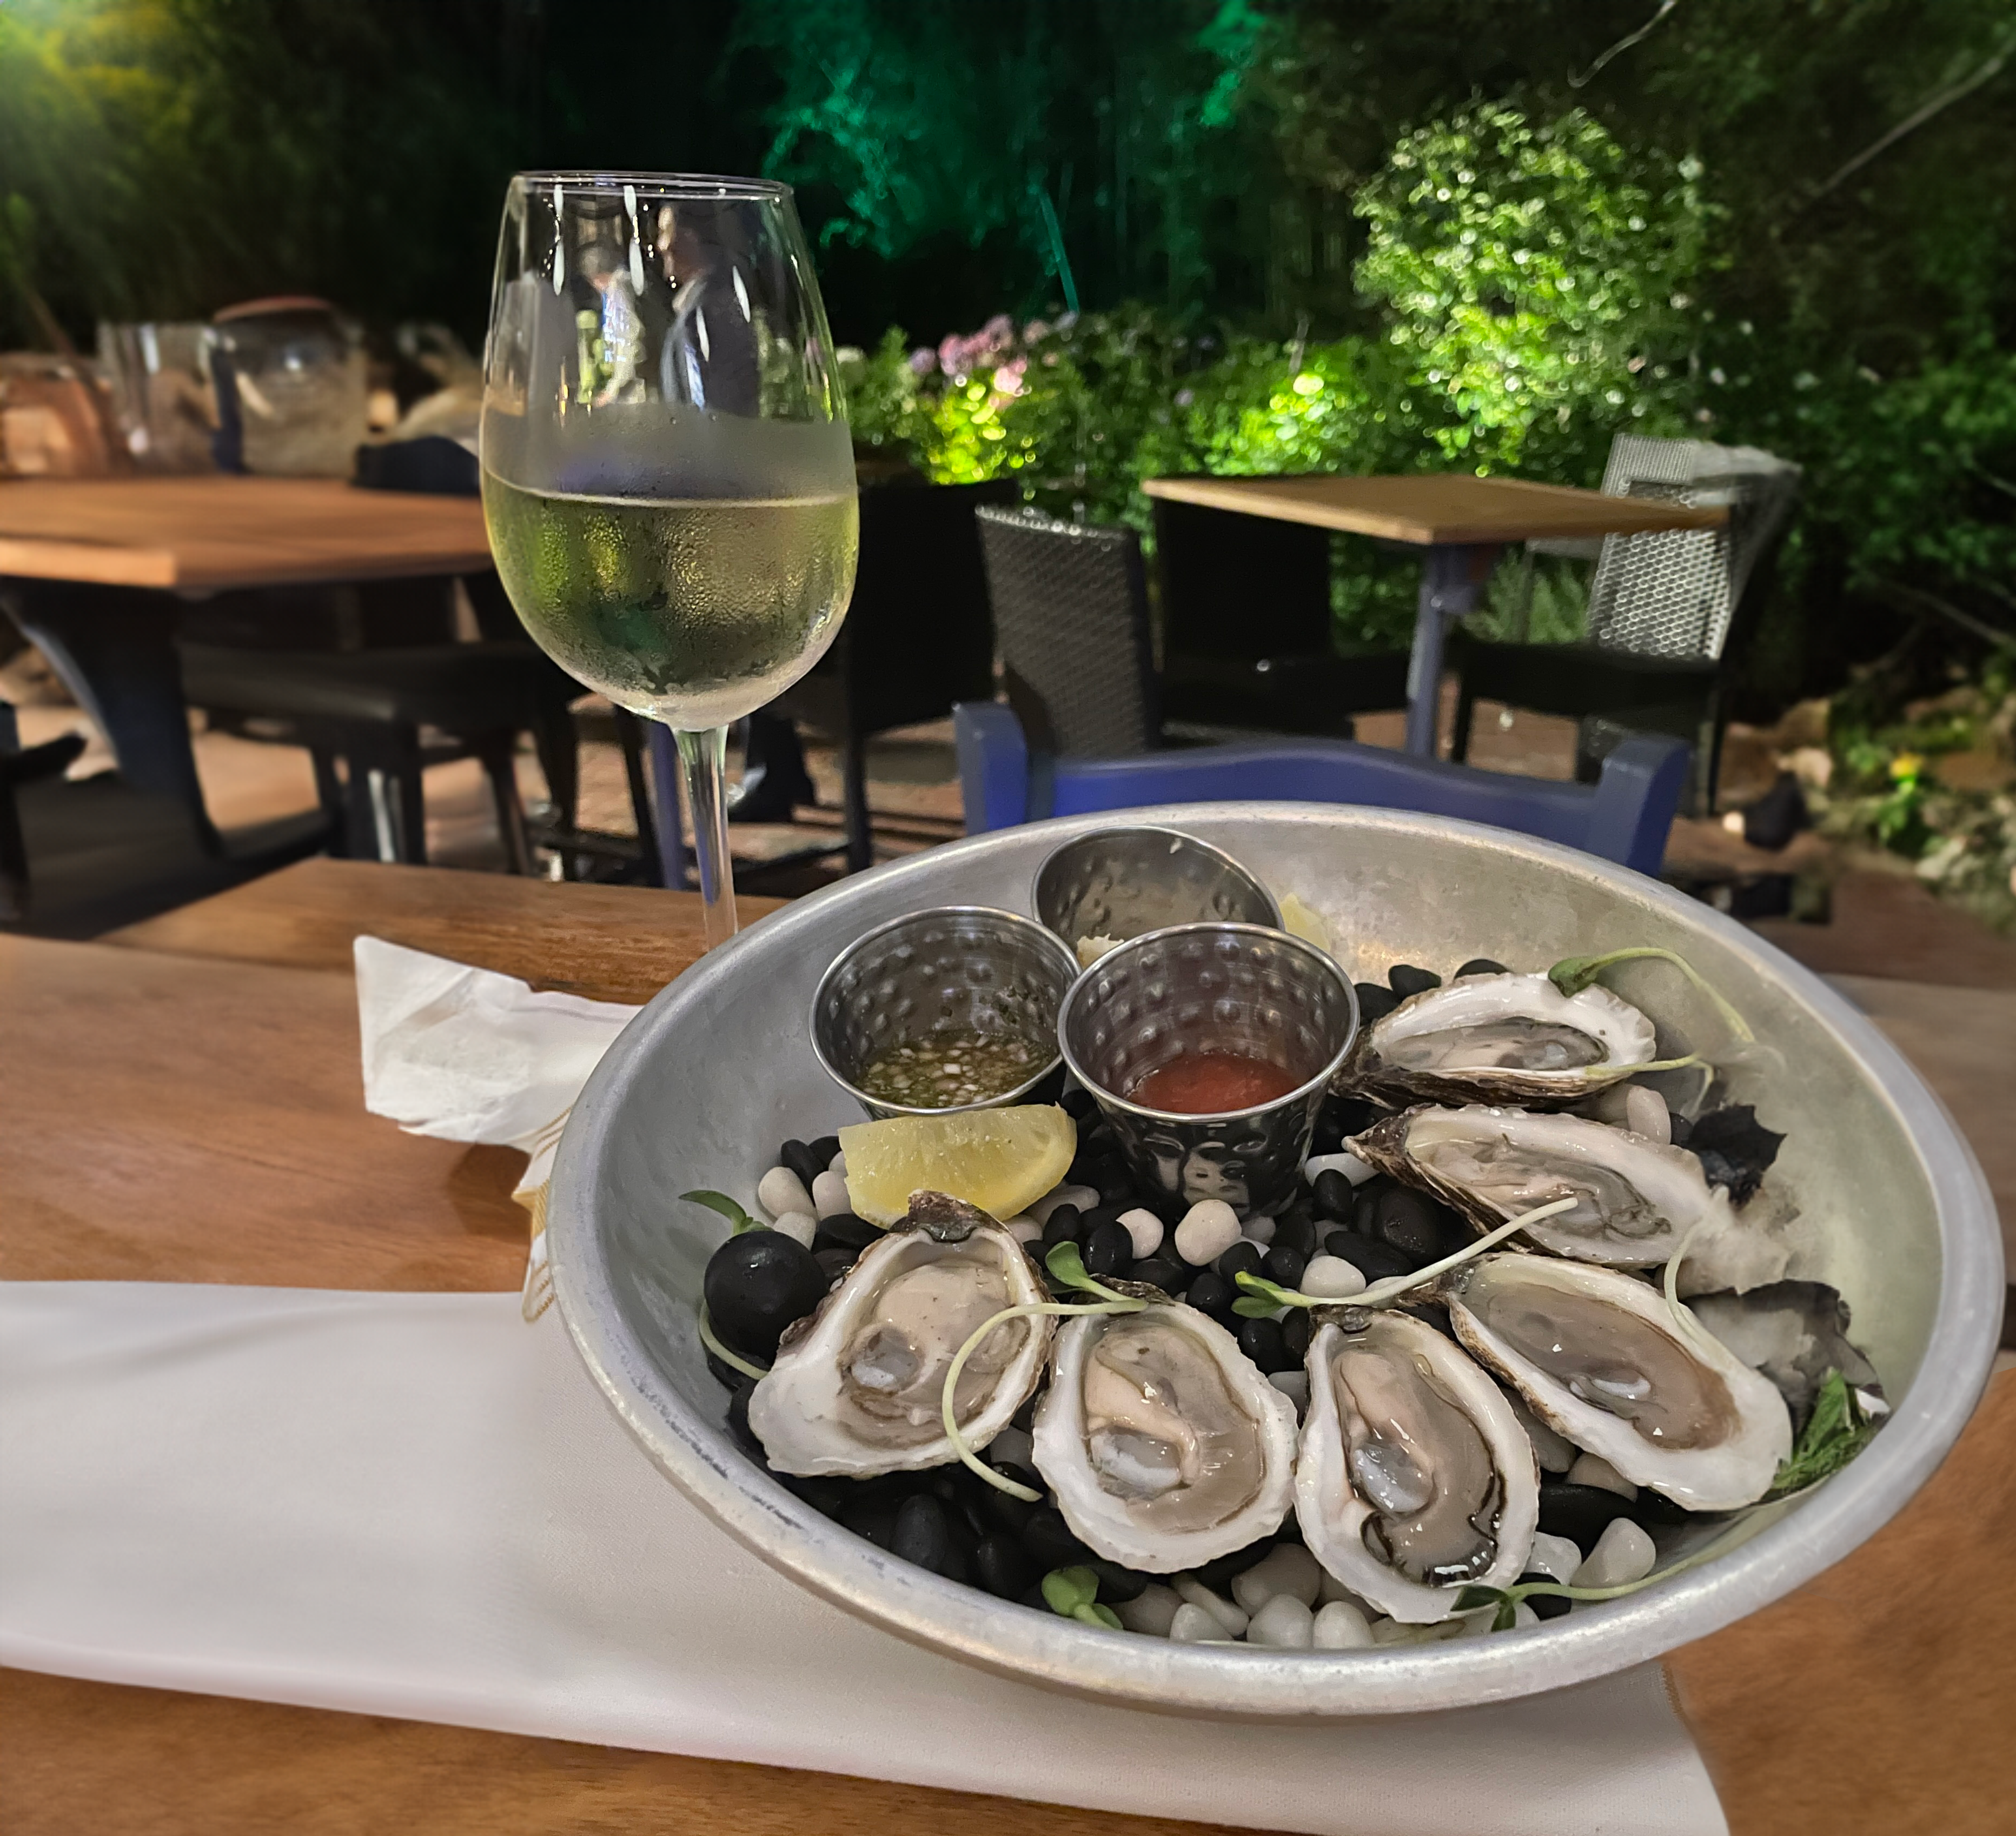 Oysters and wine by the glass re a delicious part of Fauna's Happy Hour